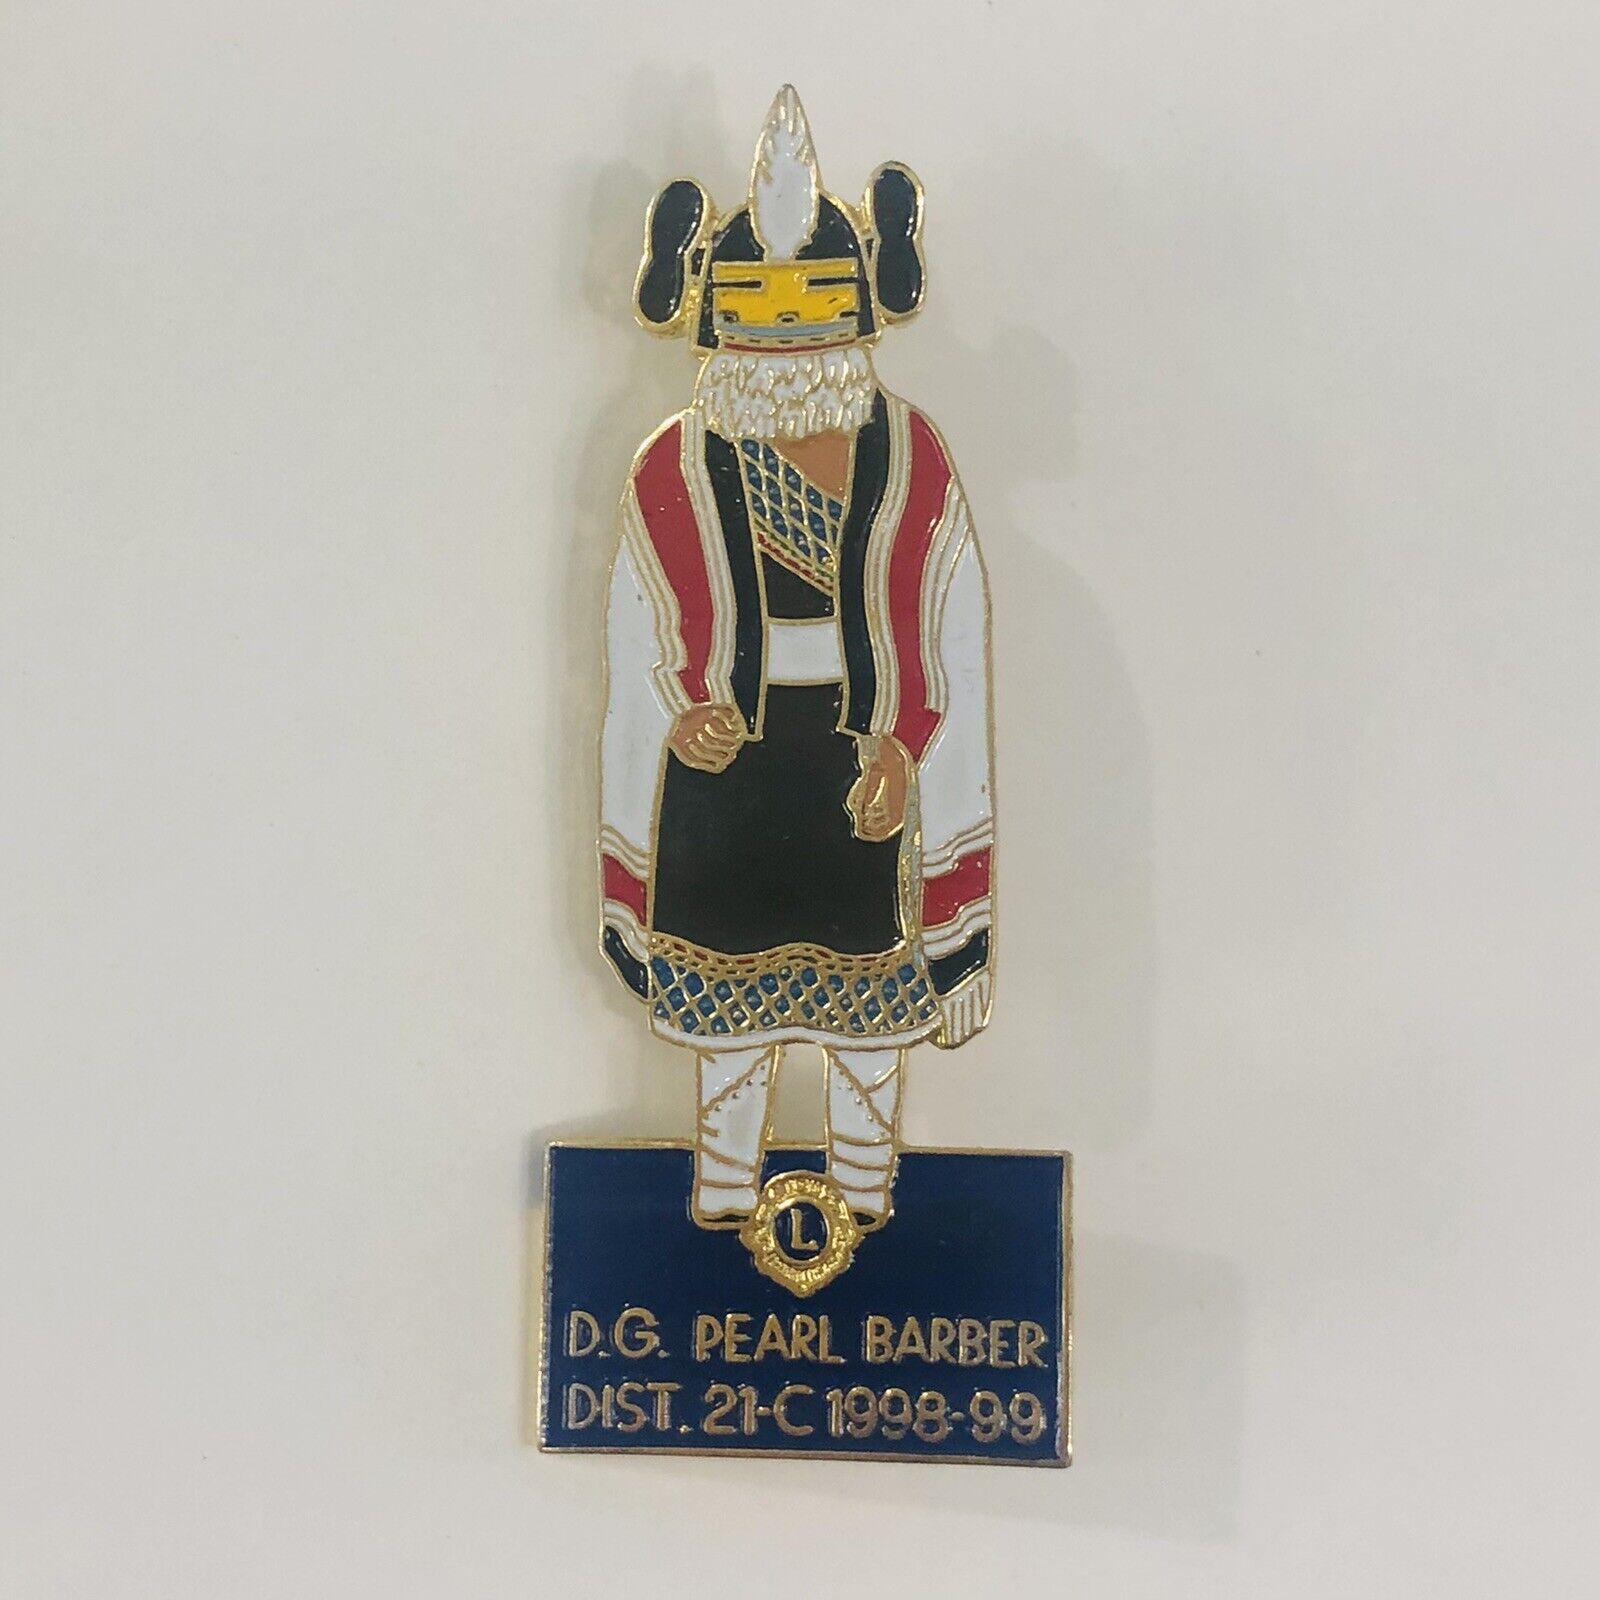 Vintage Pin: Large 2.5”1999 Dg Pearl Barber LIONS Club Traditional Dress